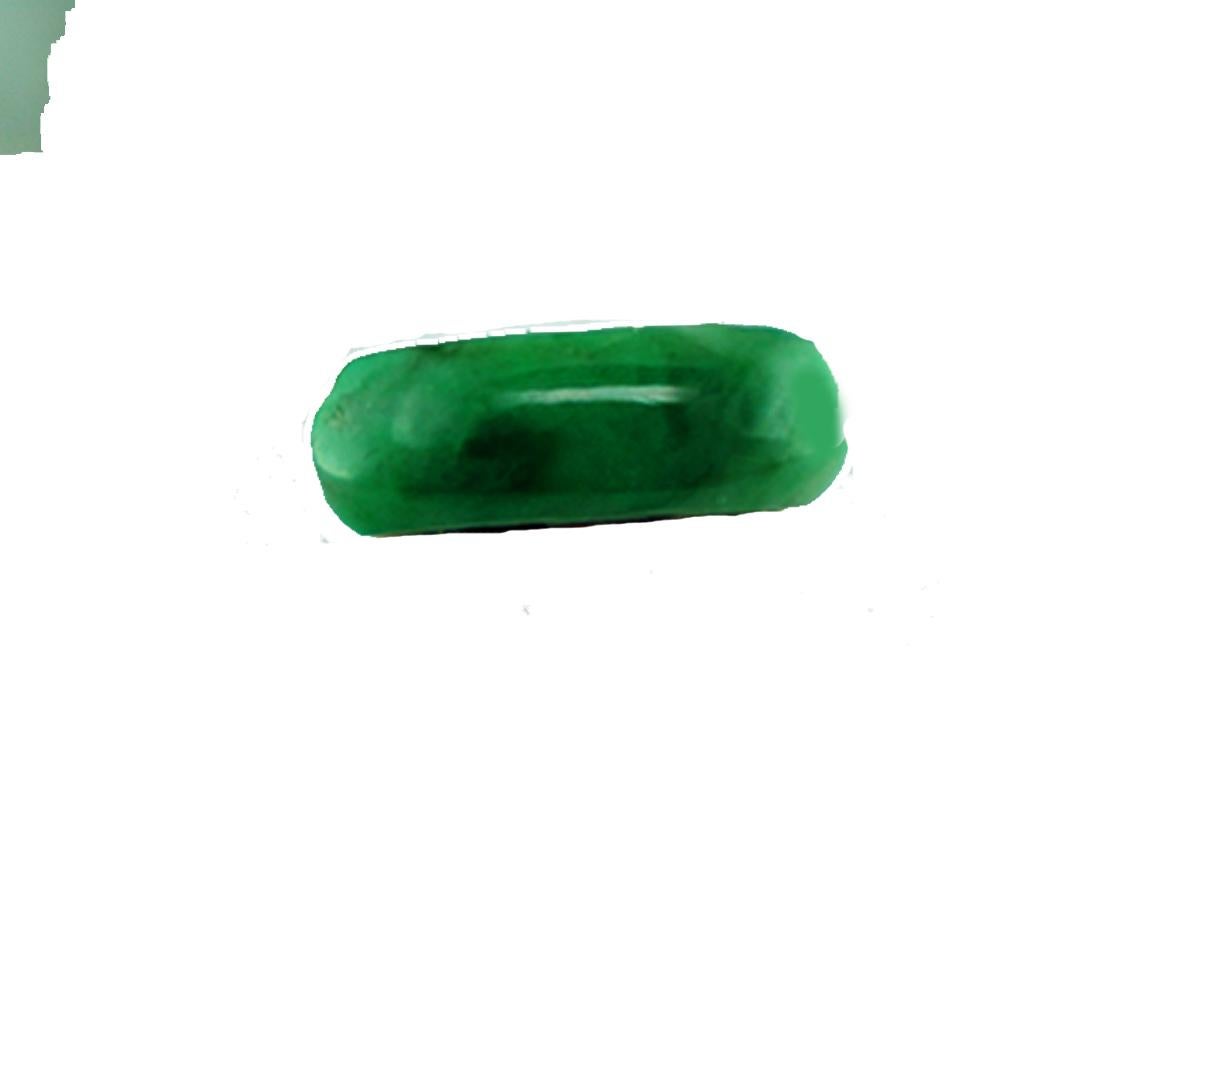 Jadeite Green Jade ring measures 7.40 mm wide and displays a convex cut gemstone. The jade is varied colors of deep veined green to granny-green apple colored 
Measures length of 19 mm wide above the ring.
The height of this ring is 10 mm
The finger